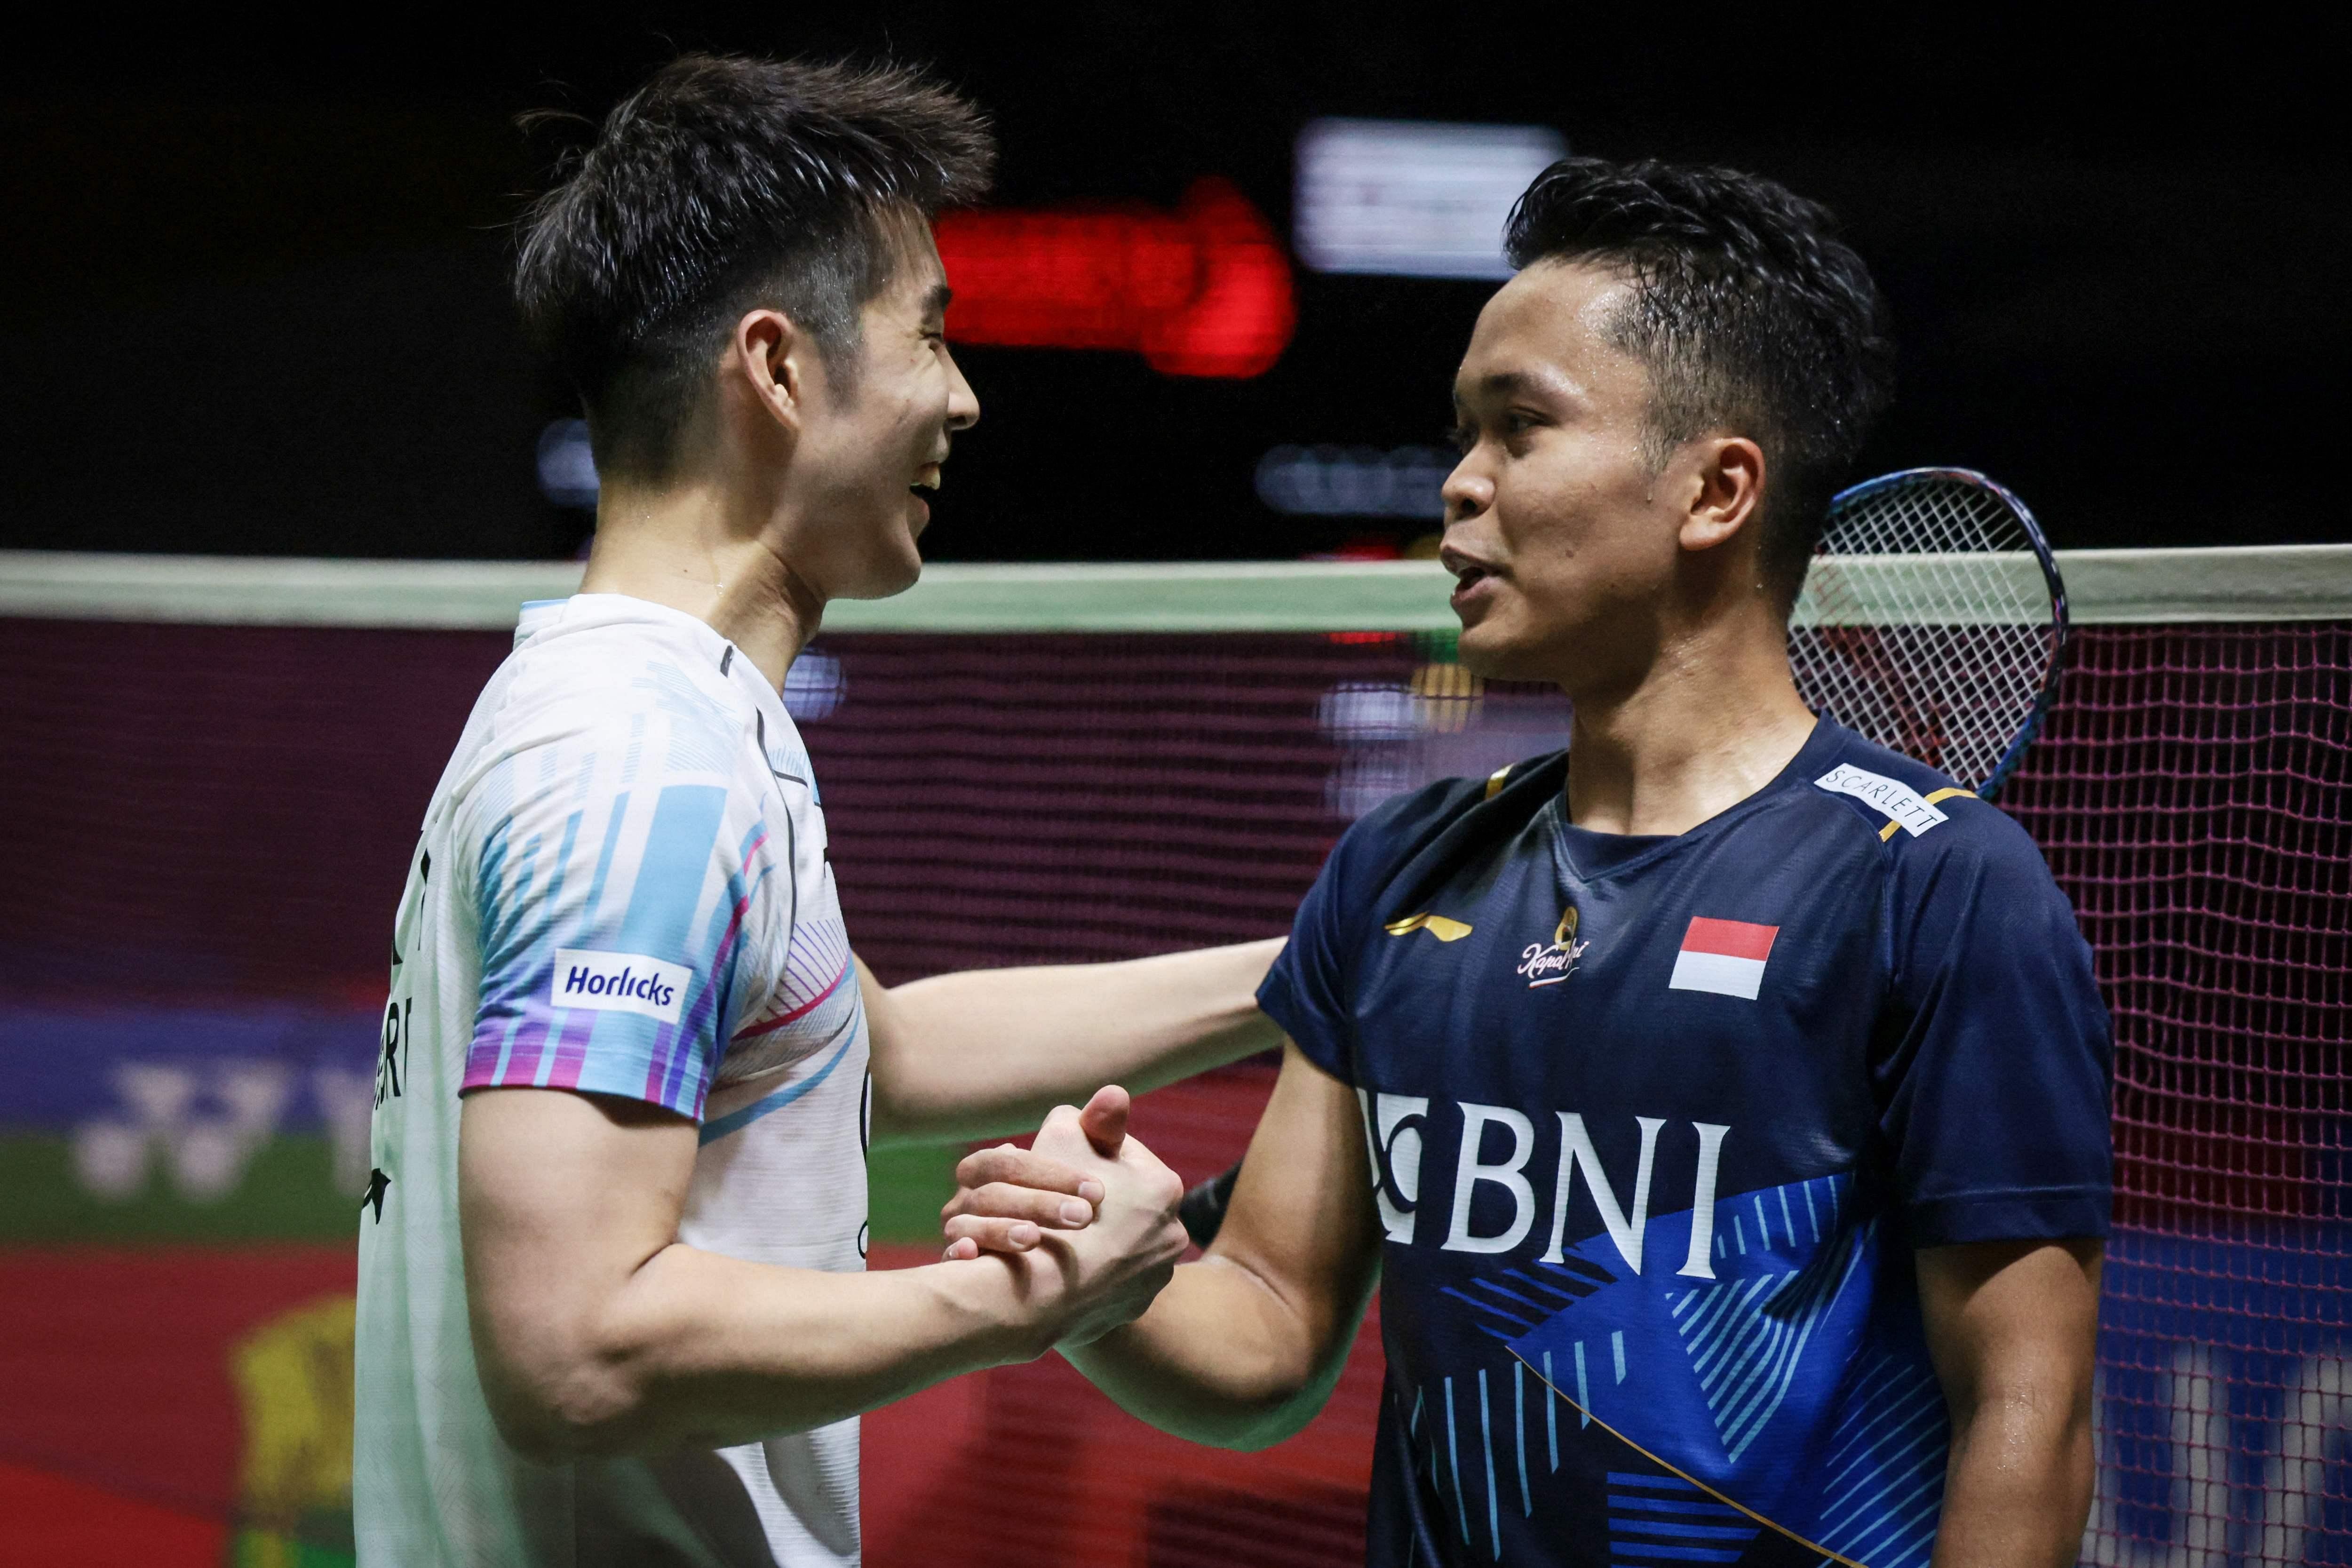 Loh Kean Yew through to French Open q-finals after long-awaited win over Anthony Ginting